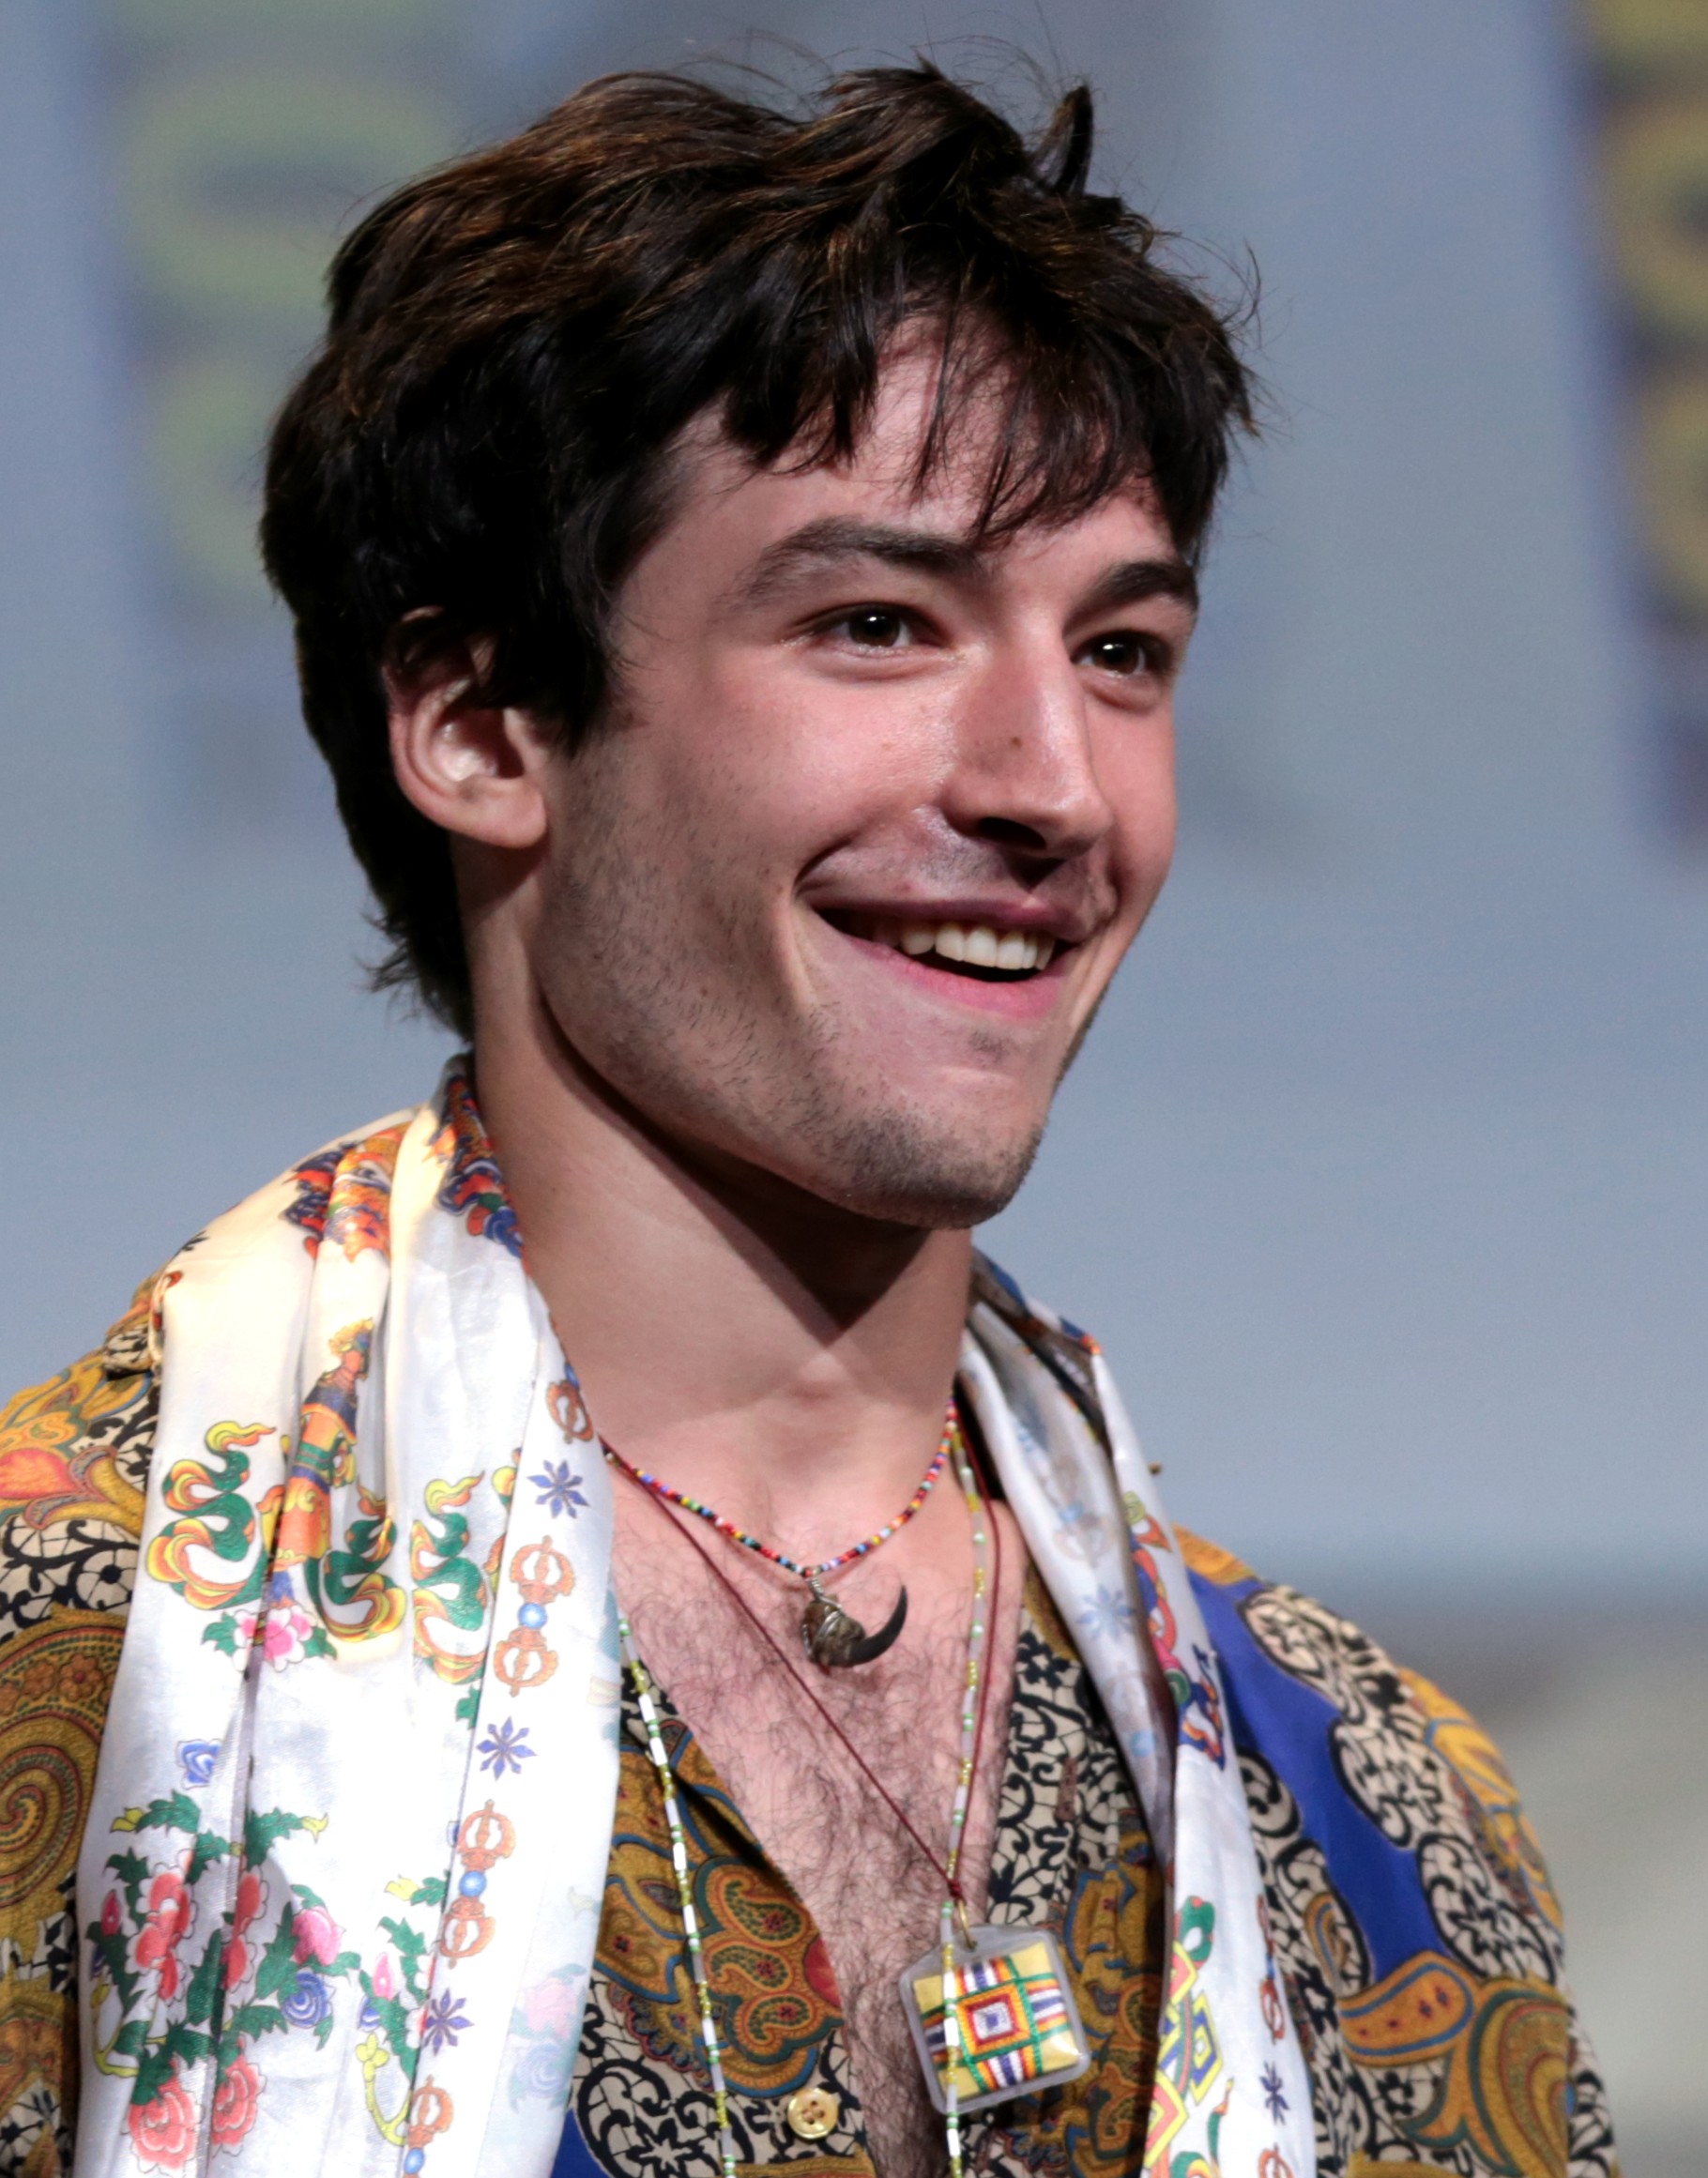 Ezra Miller wearing a white scarf and multi-colored shirt